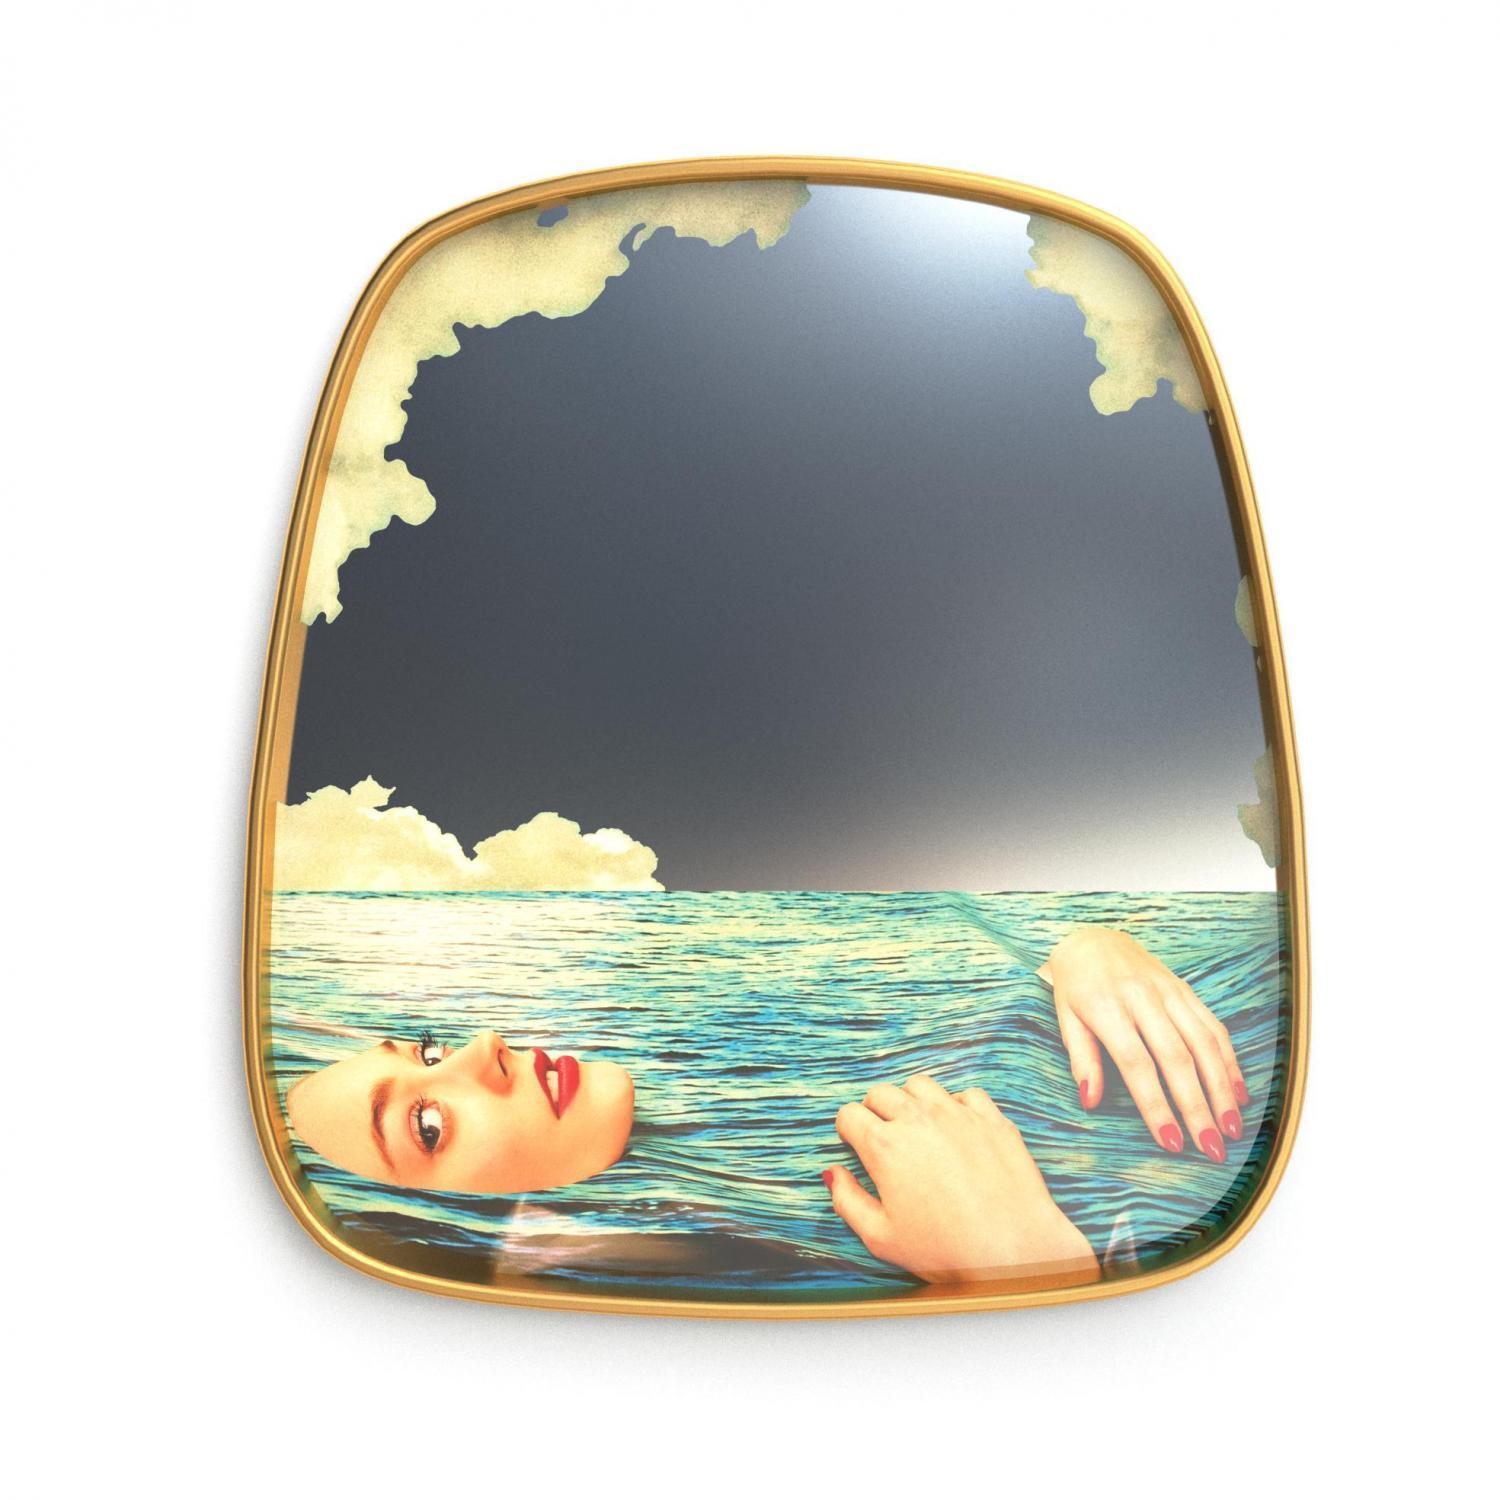 Available in three dimensions, the mirrors of the Toiletpaper line make you the protagonist of a mad and disrespectful world. Add some eccentricity to your room with these mirrors by TOILTETPAPER. They come with a precious golden frame to add that